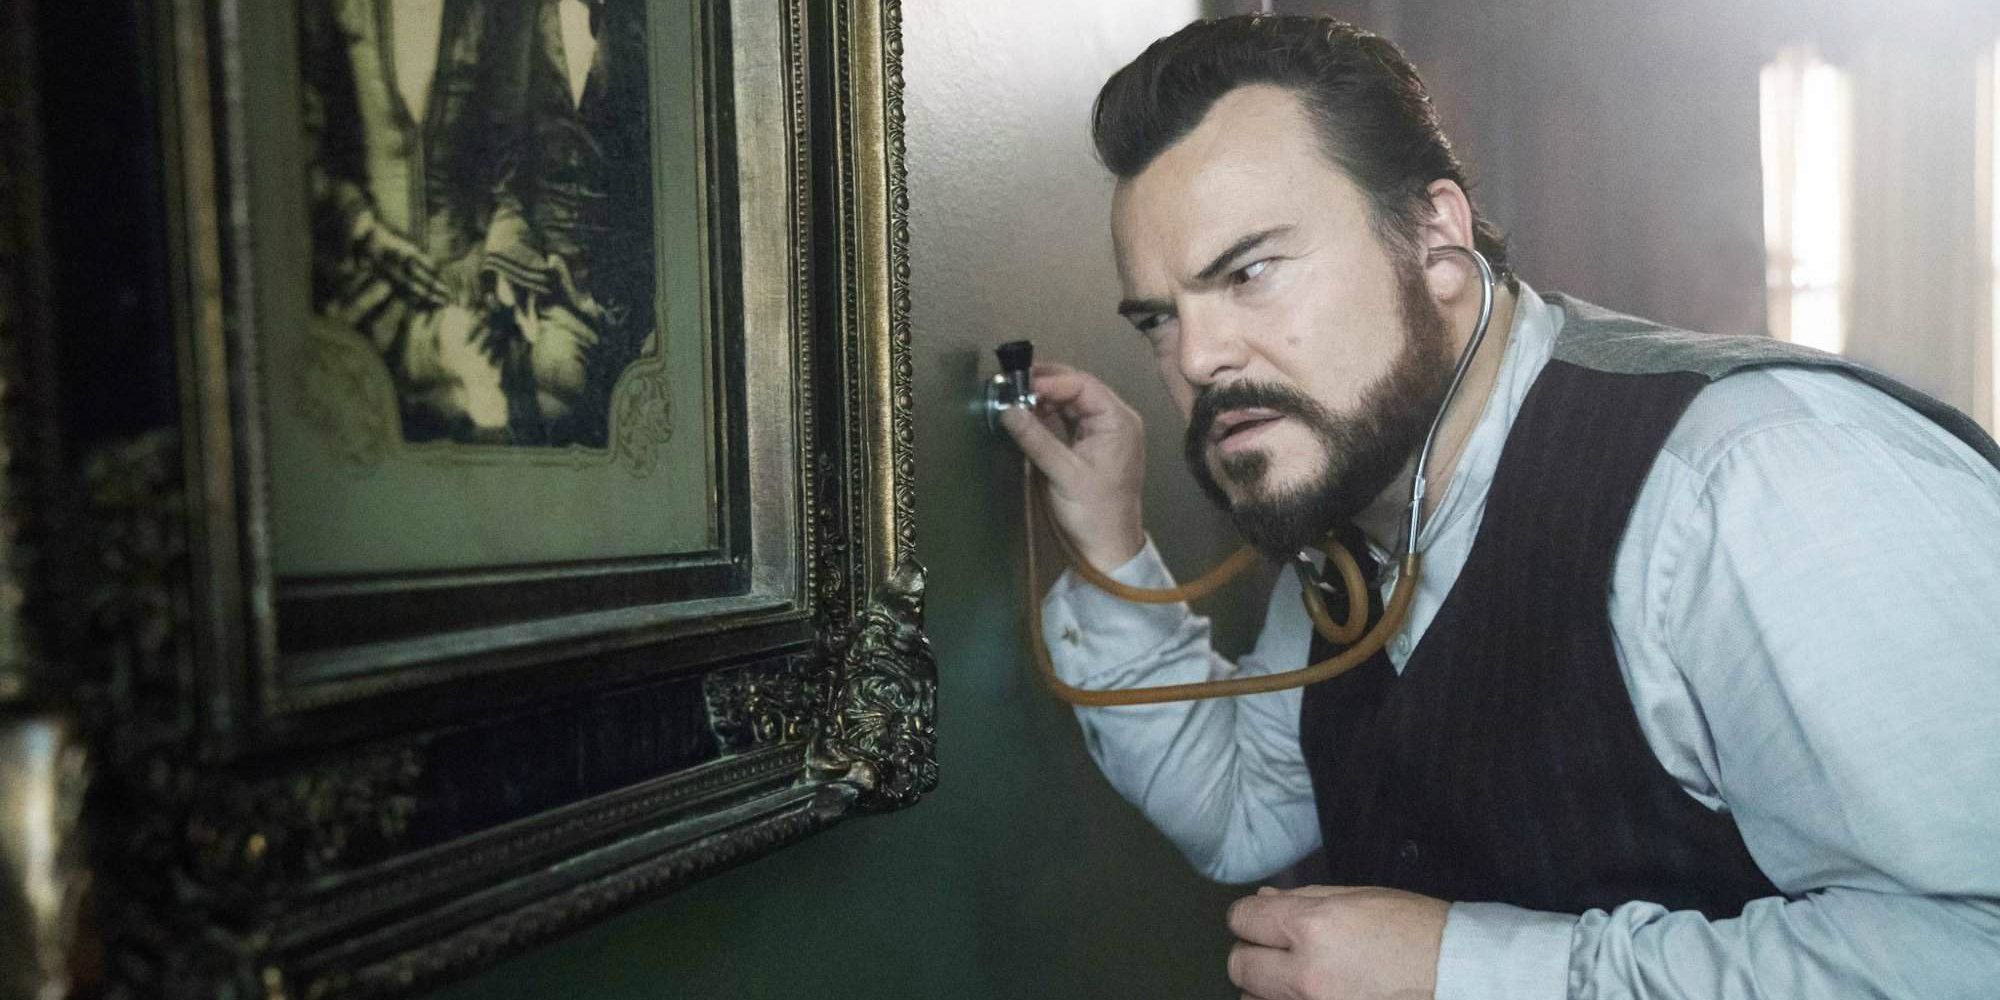 Jack Black's Jonathan listens to the wall with a stethoscope in The House With A Clock In Its Walls